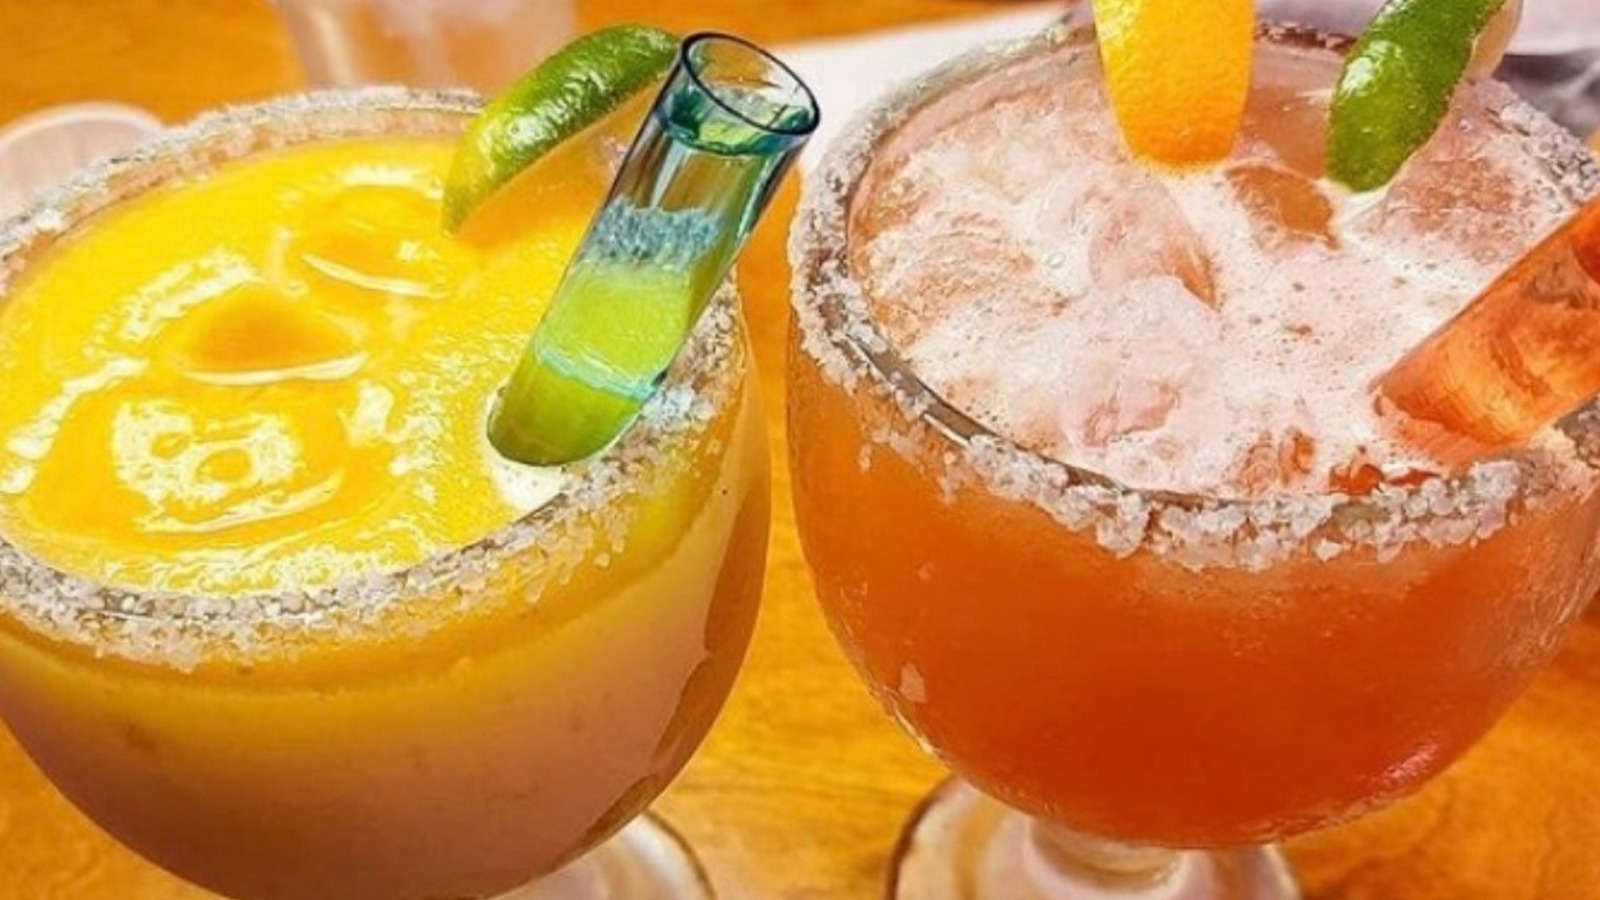 https://www.mashed.com/img/gallery/texas-roadhouse-mixed-drinks-and-cocktails-ranked-worst-to-best/l-intro-1696116389.jpg